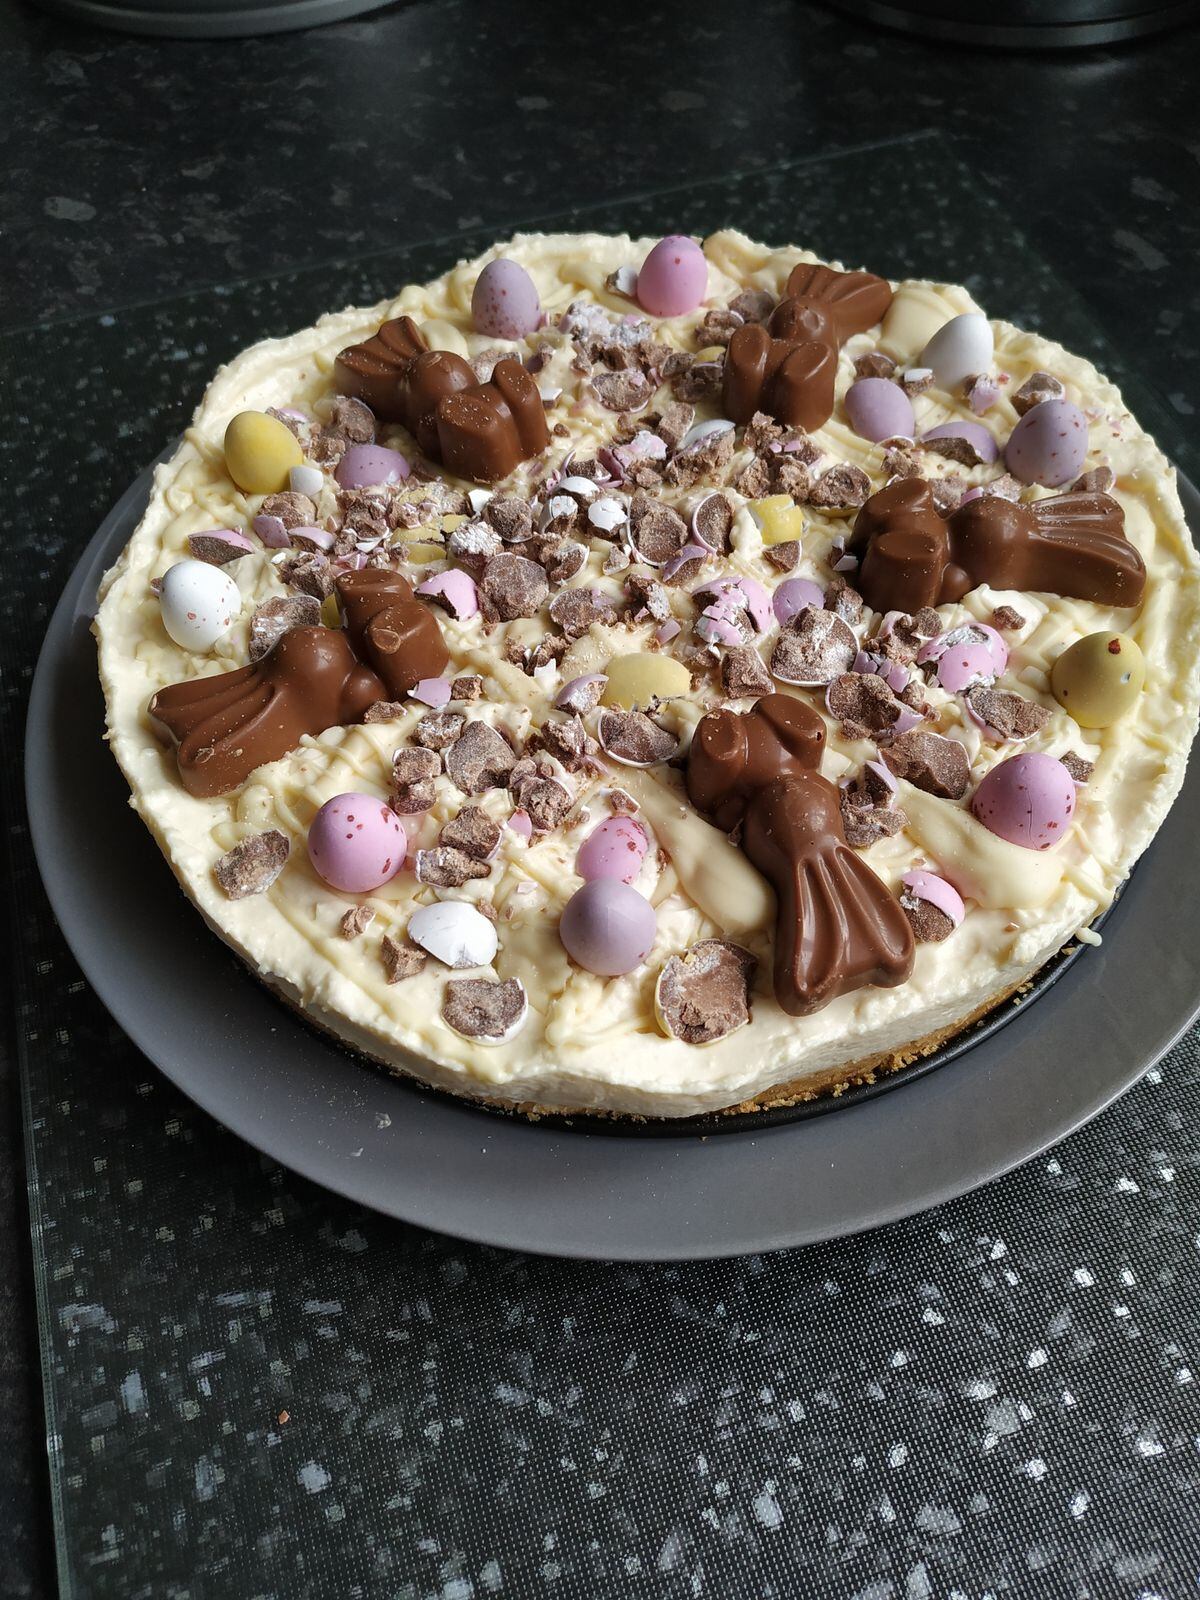 Becki Lloyd created this white chocolate cheesecake - needed no flour though so was an ideal recipe